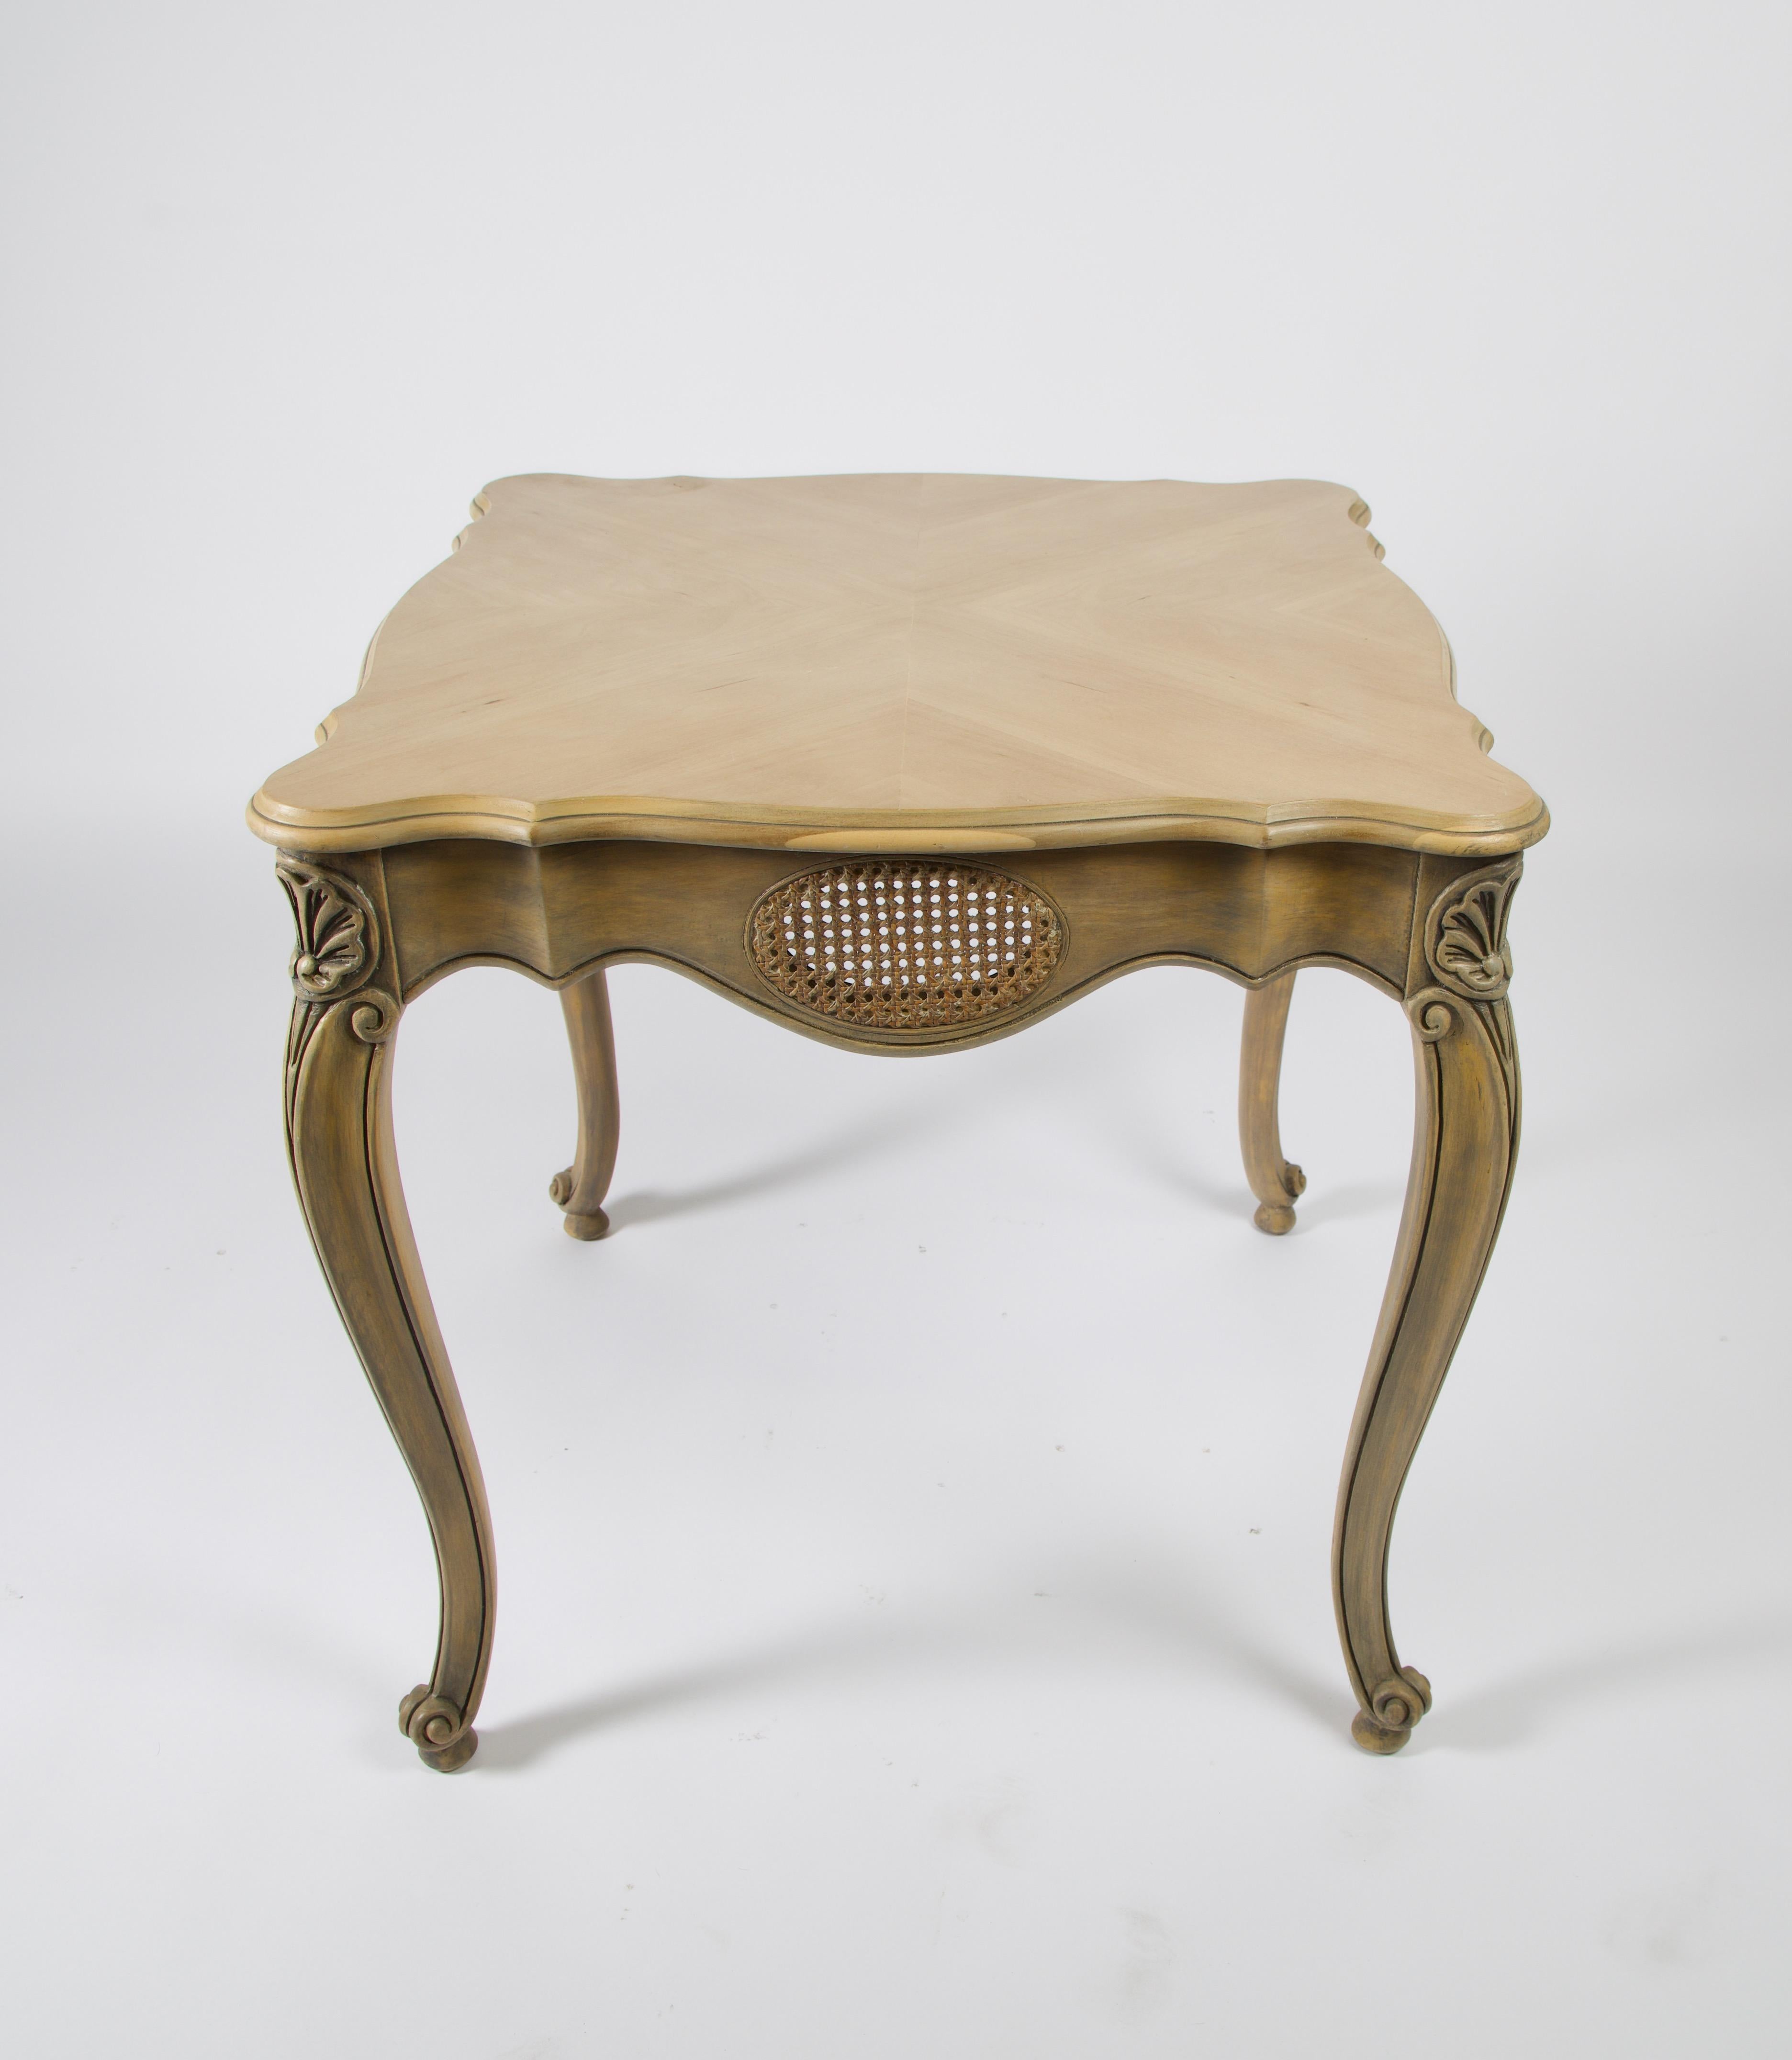 french provincial furniture